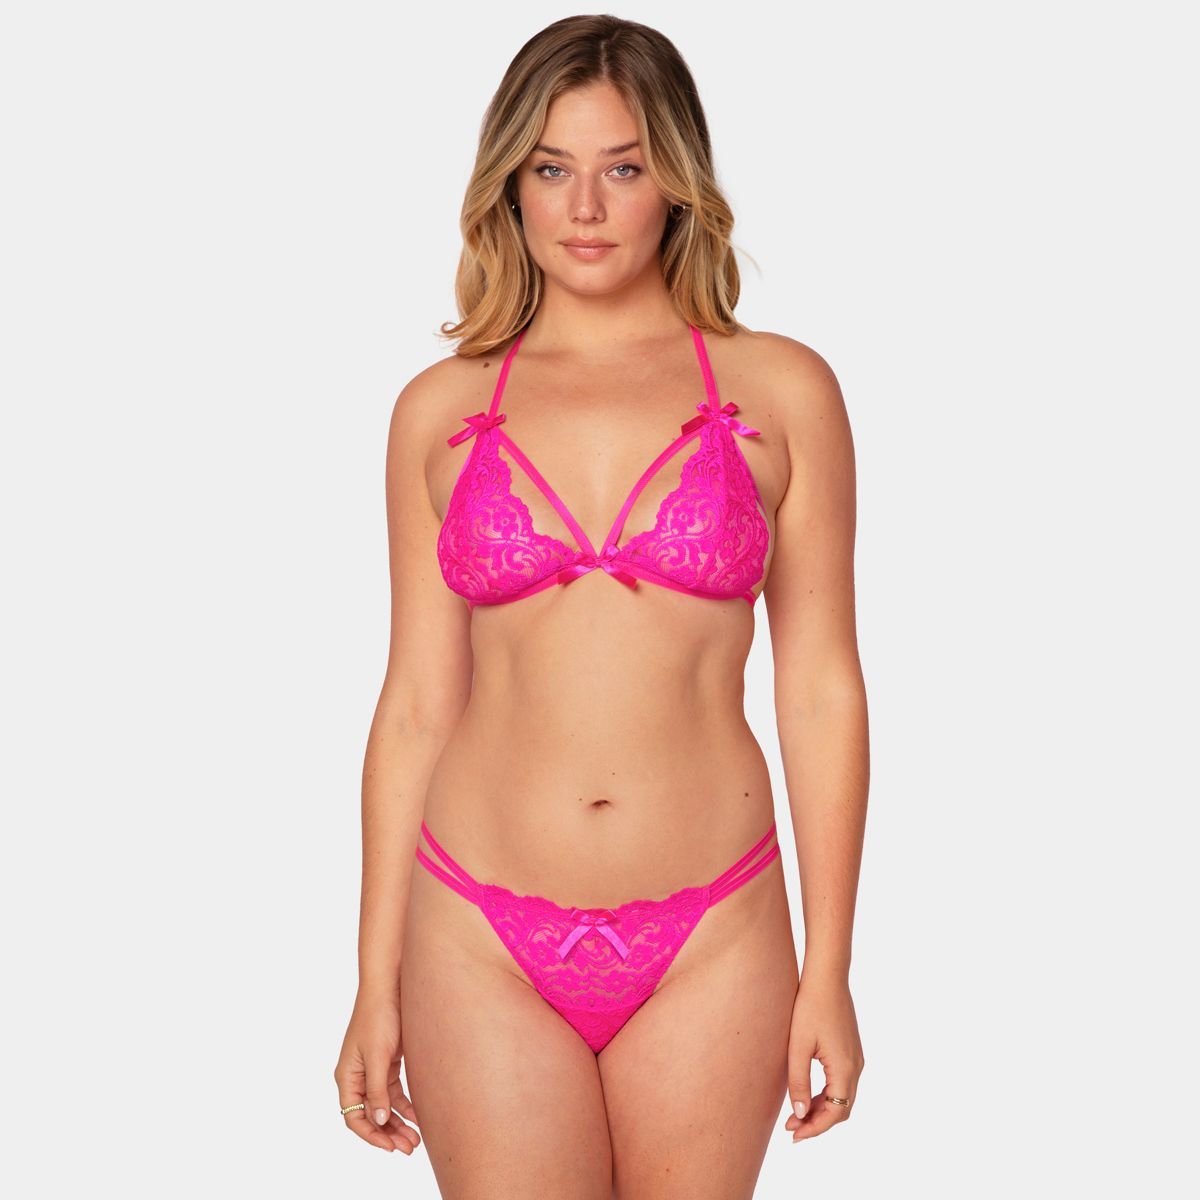 Smart & Sexy Women's Matching Bra and Panty Lingerie Set | Target